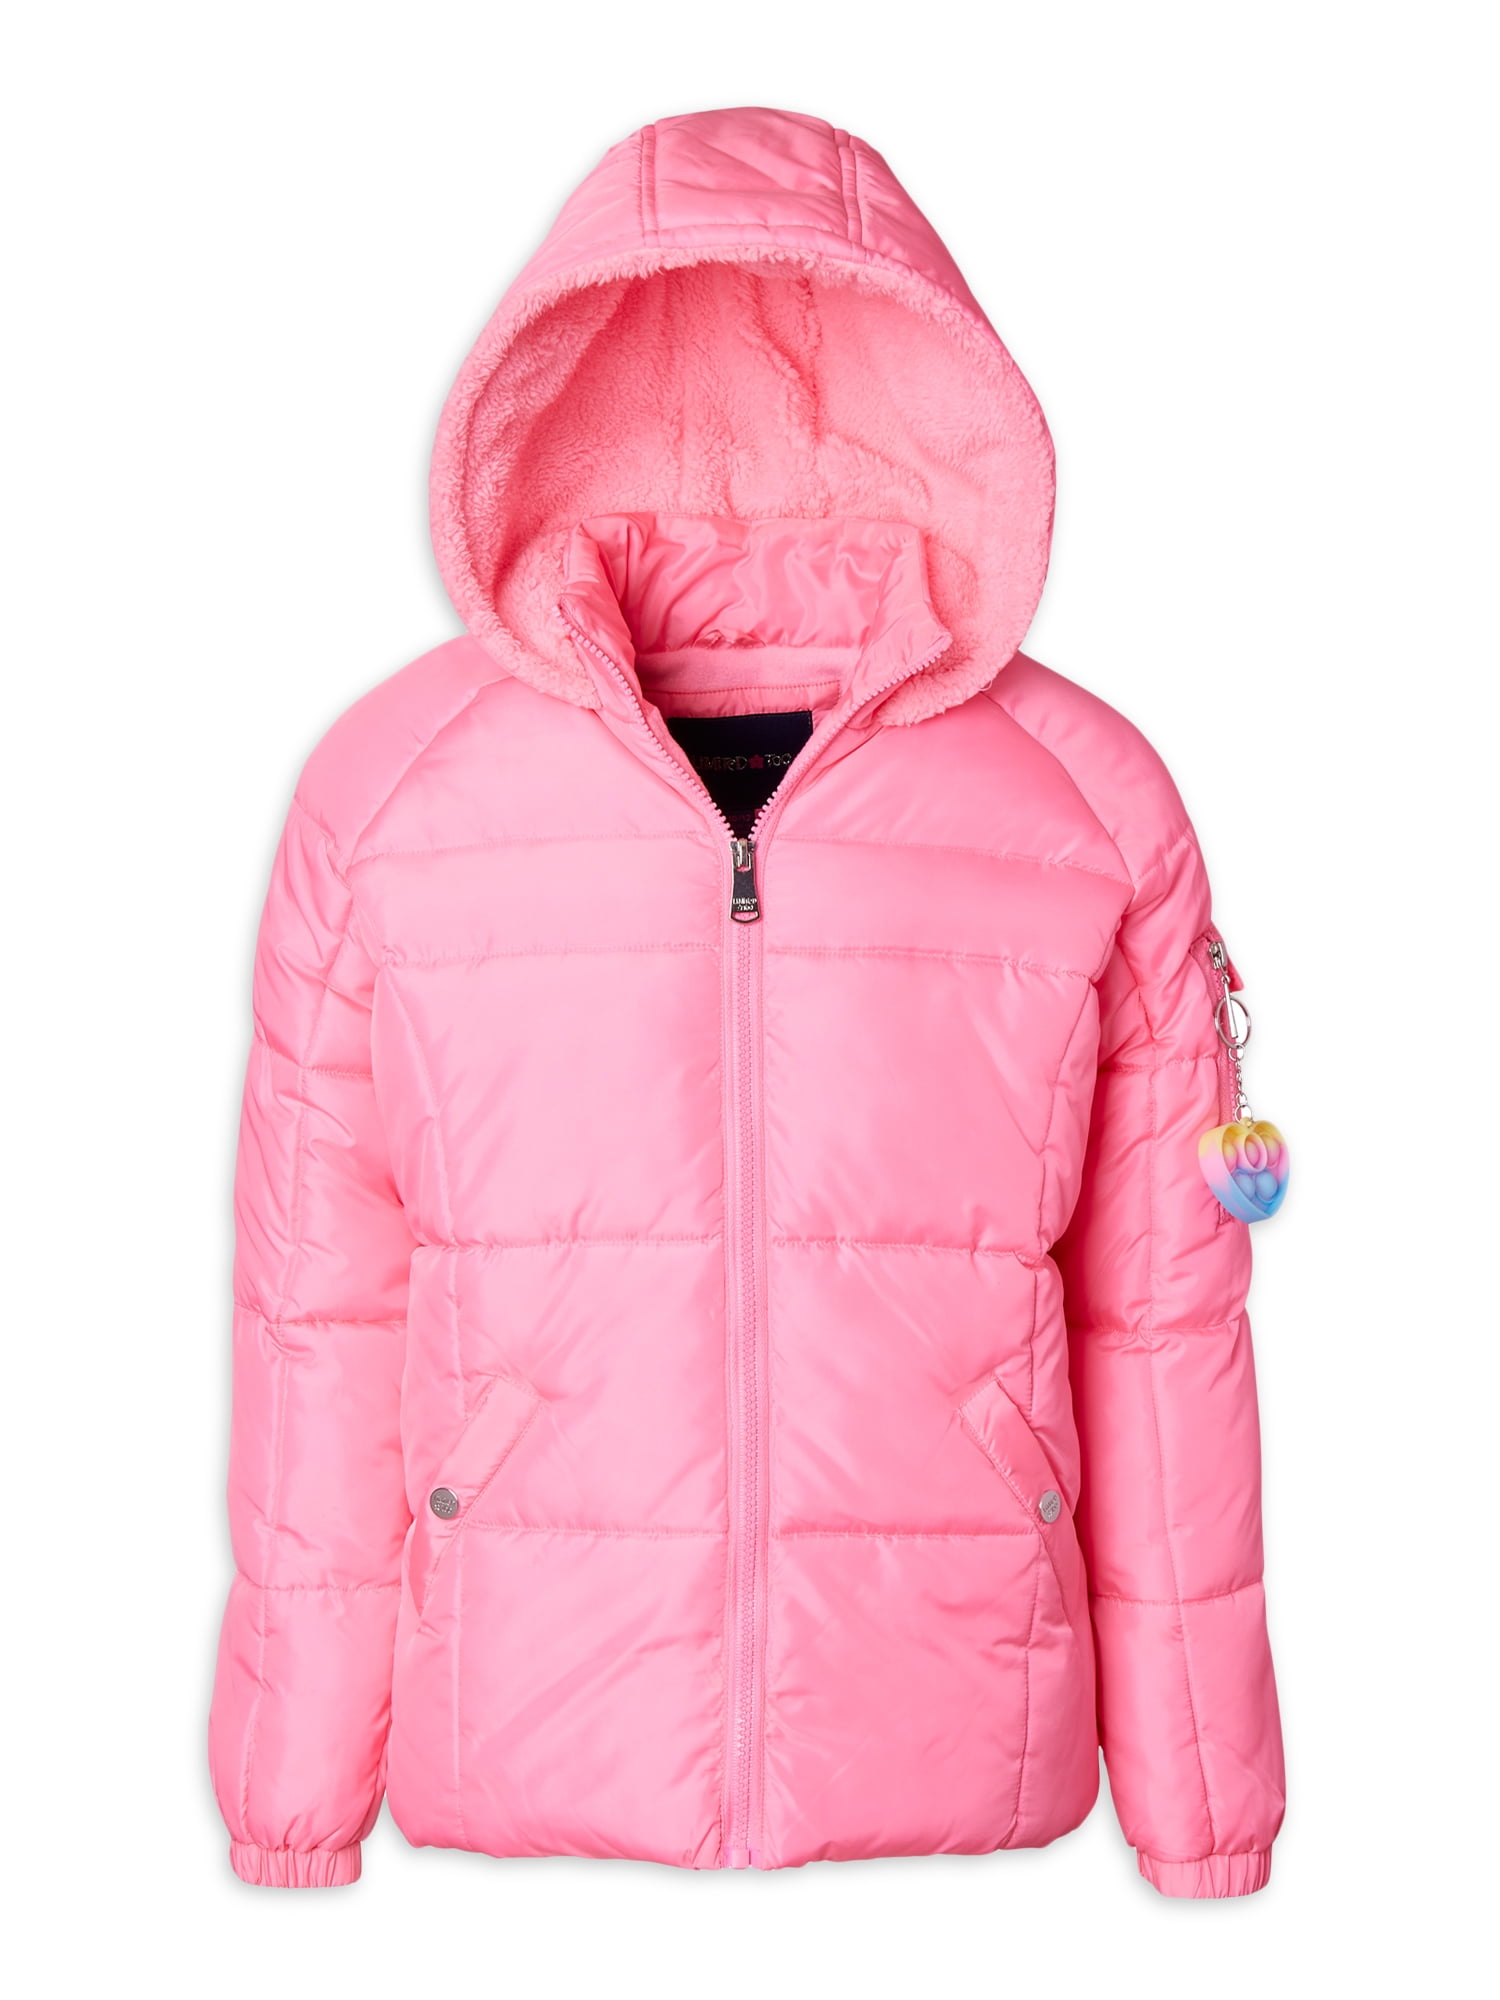 Limited Too Toddler Puffer Jacket with Sherpa Fleece Hood Lining, Sizes 2T-4T - Walmart.com